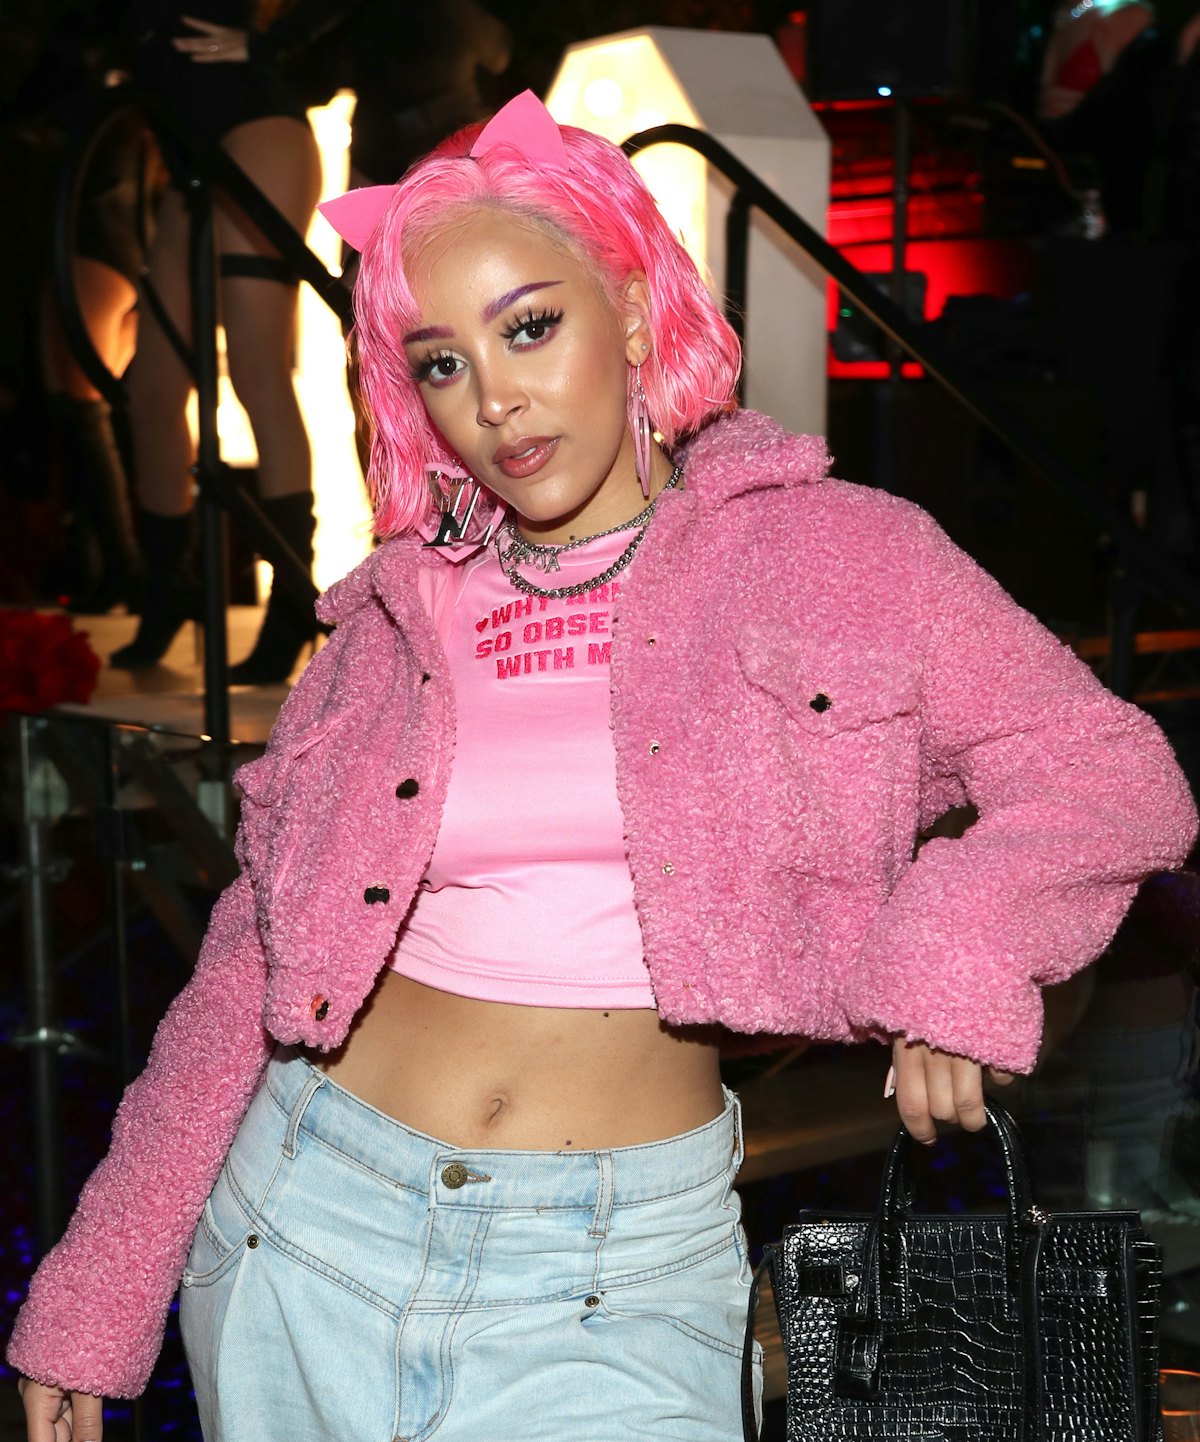 The Weeknd Doja Cat S In Your Eyes Remix Lyrics Will Get Stuck In Your Head